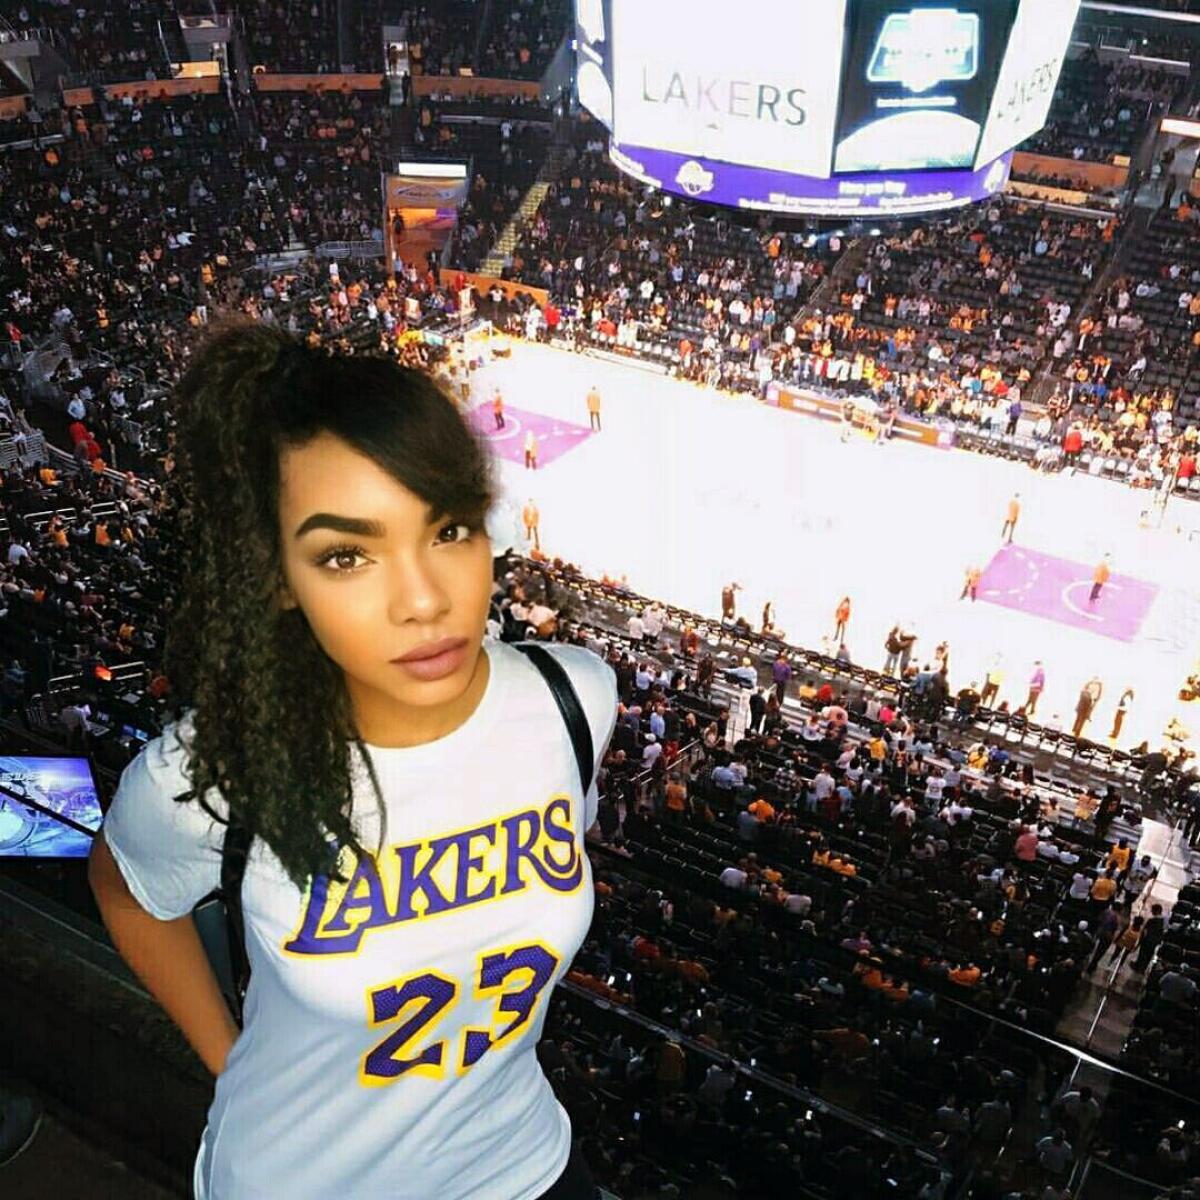 Lakers podcast host Vivian Flores poses at Staples Center in what many claim to be a photoshopped image.